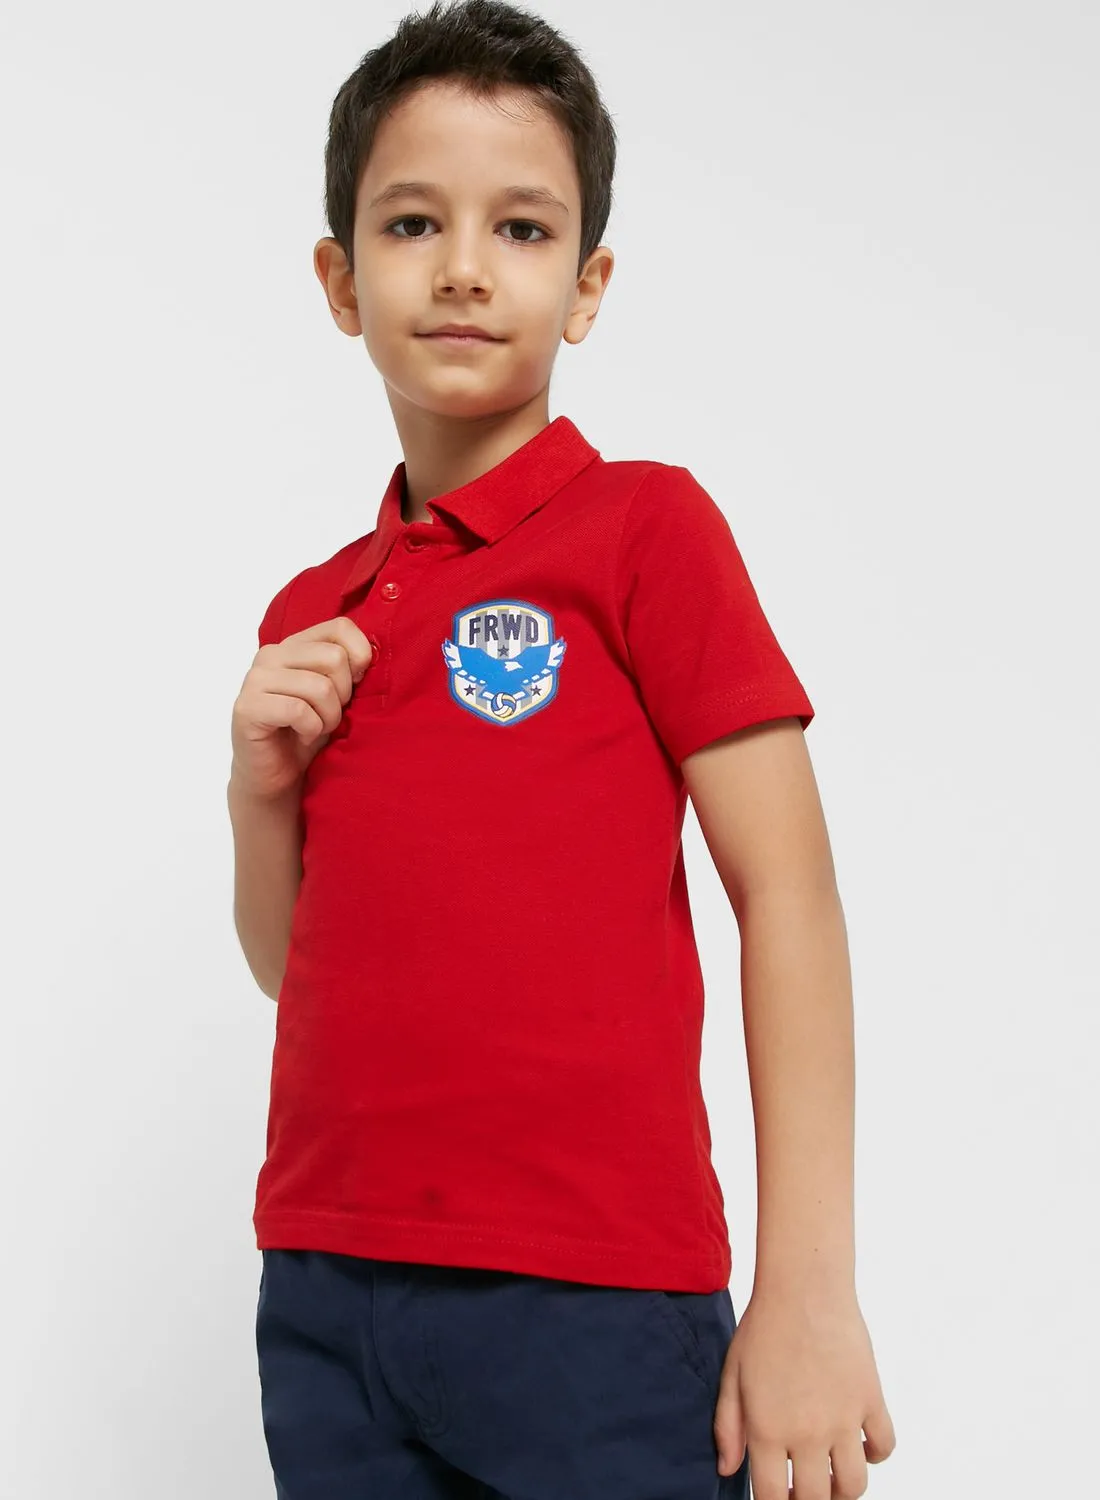 Pinata Embroidered T-Shirt For Boys